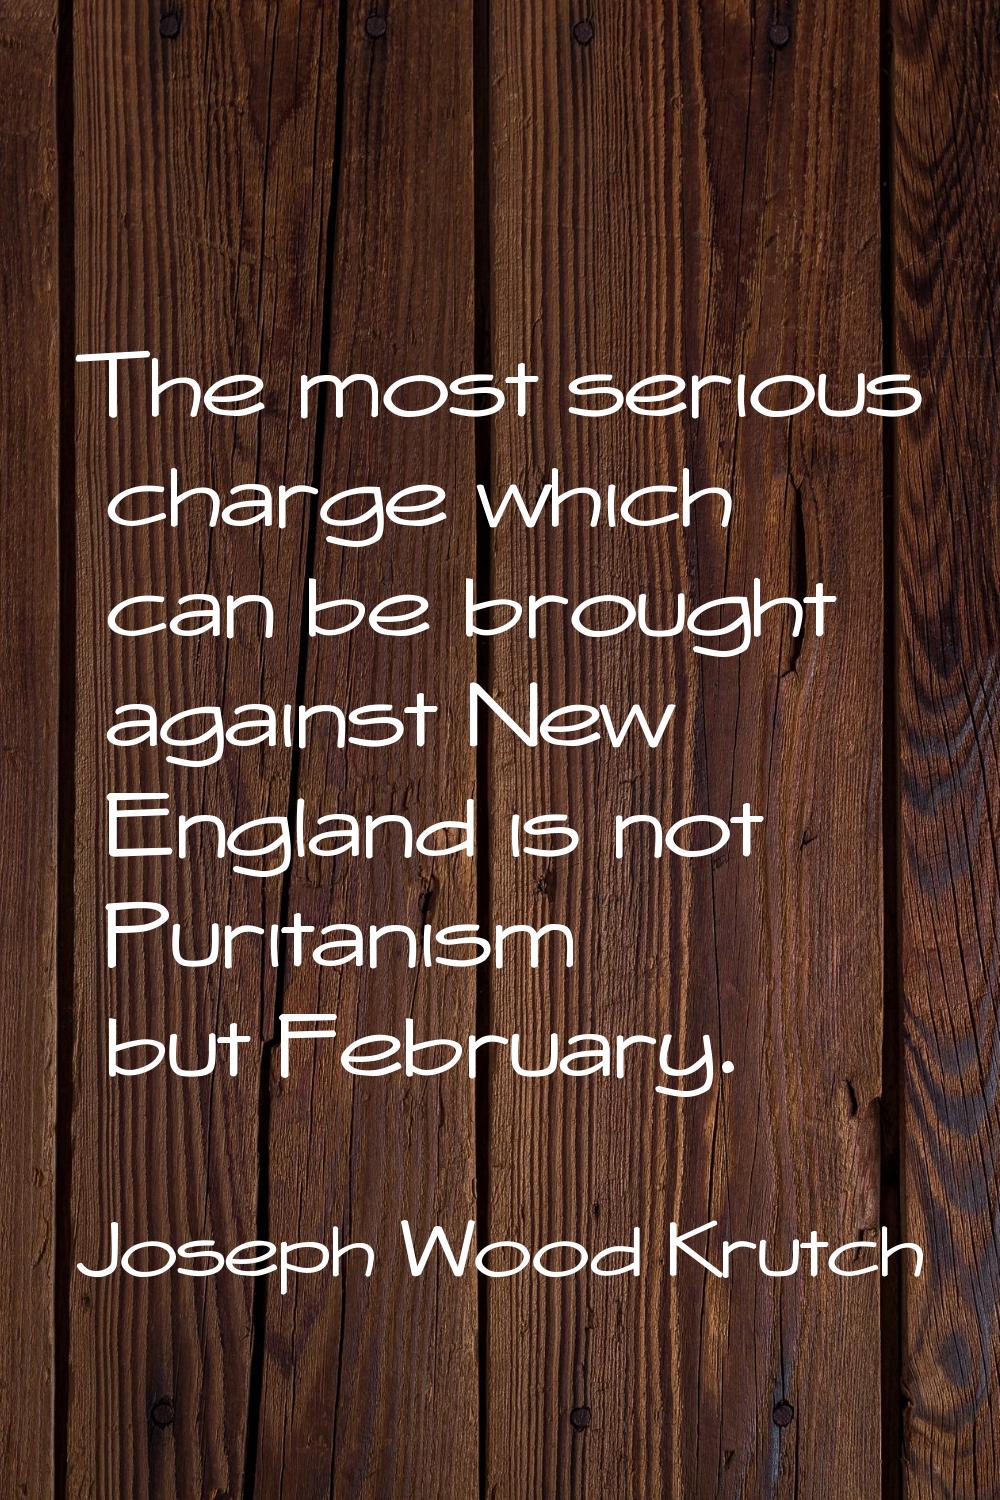 The most serious charge which can be brought against New England is not Puritanism but February.